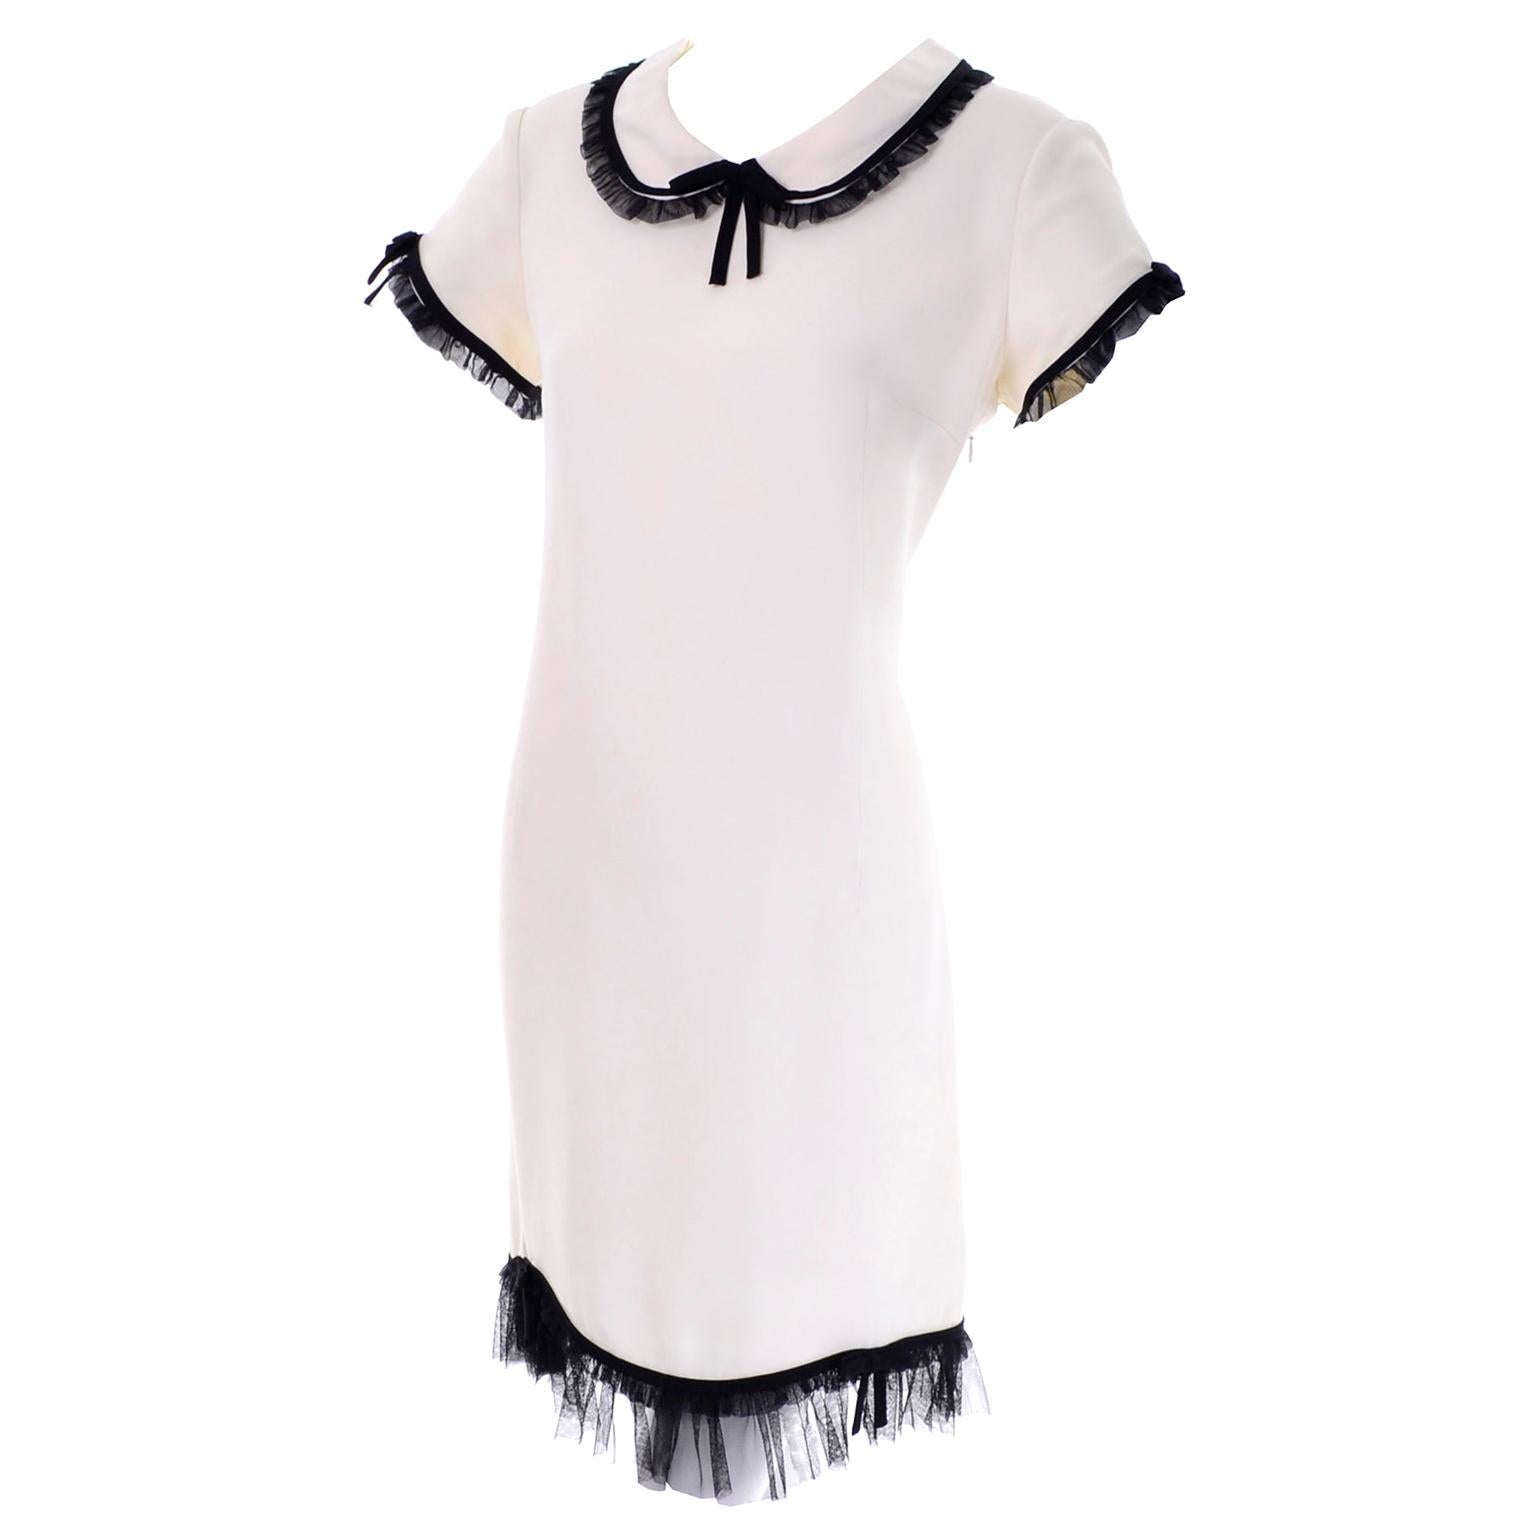 1990s Vintage Moschino Ivory Crepe Dress With Black Tulle Net Ruffle Trim & Bow